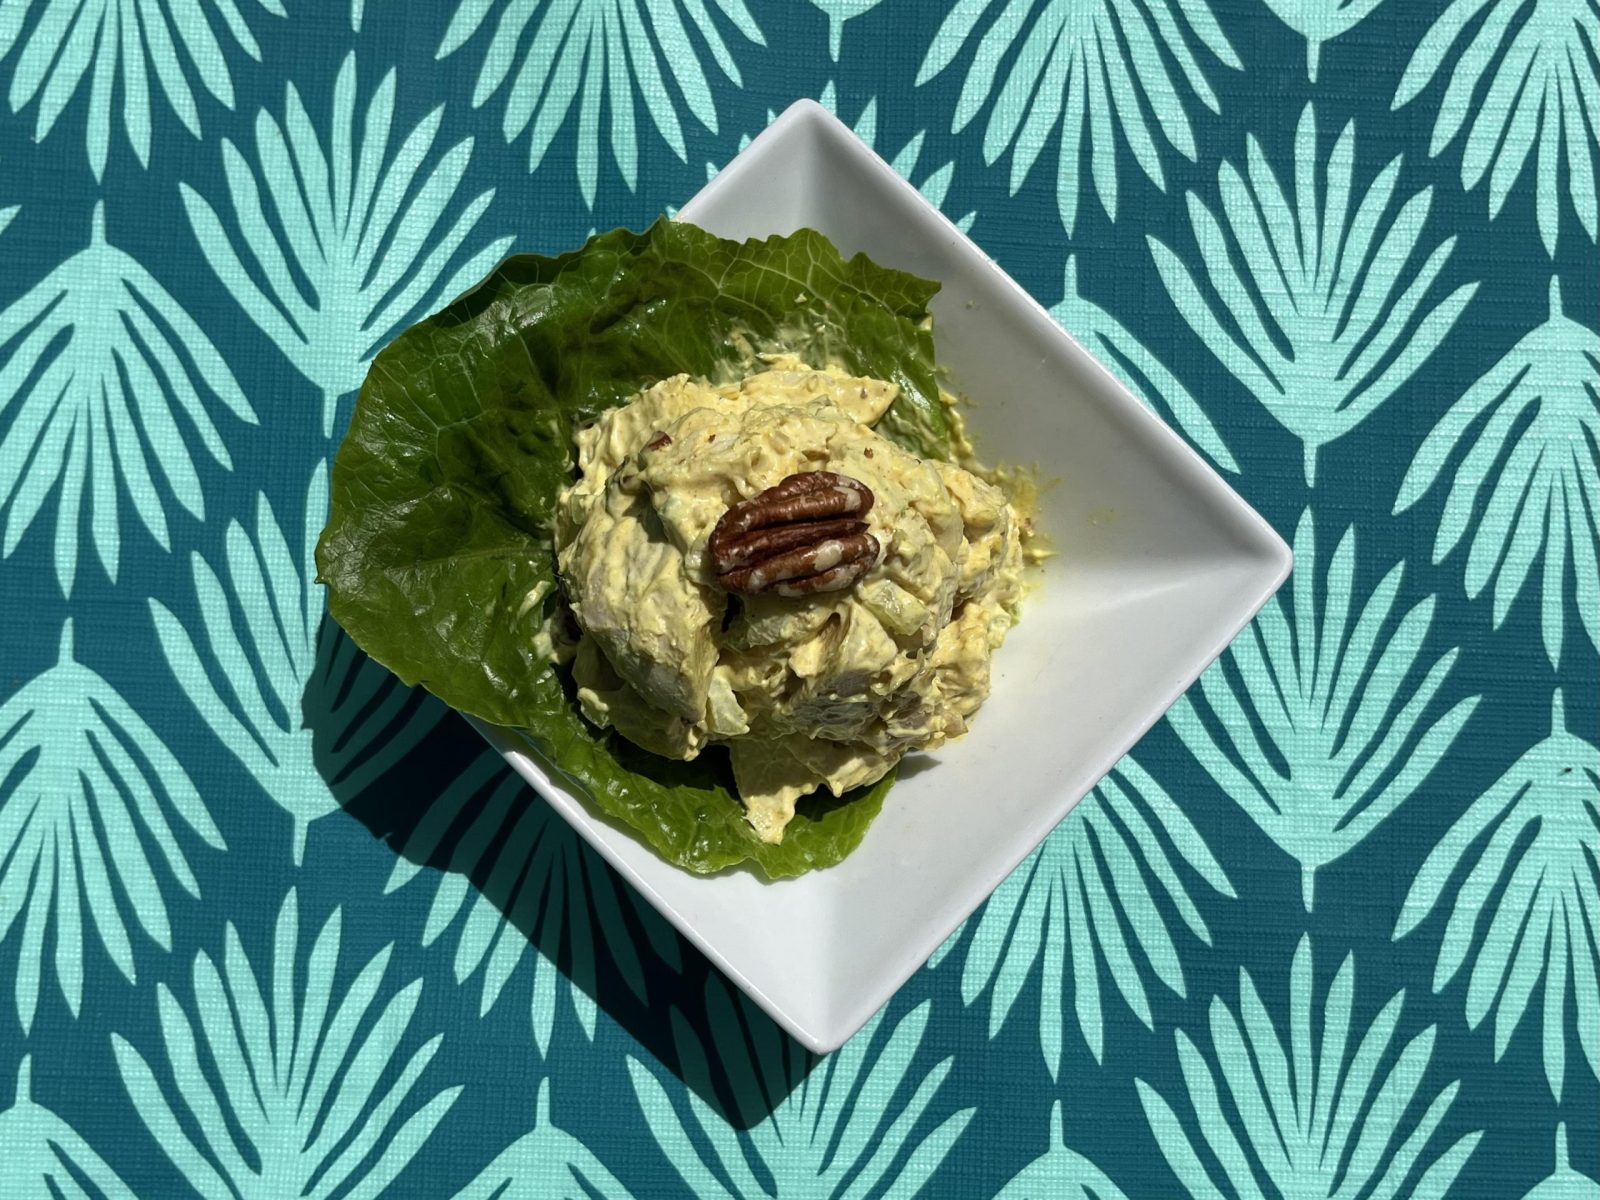 A dish of chicken salad sits on a blue-patterned tablecloth